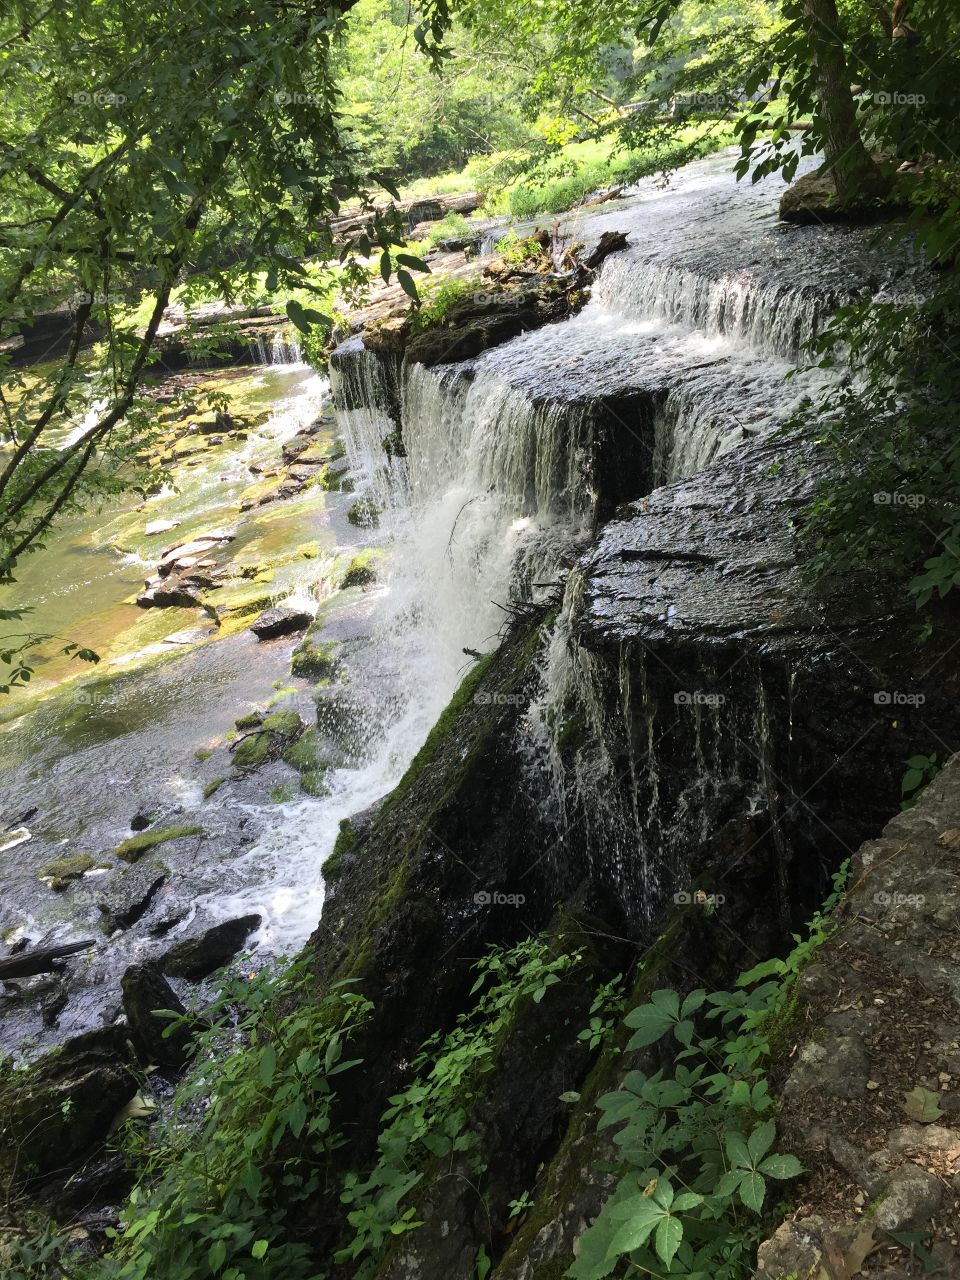 Waterfalls in TN. Hiking in TN checking out waterfalls
